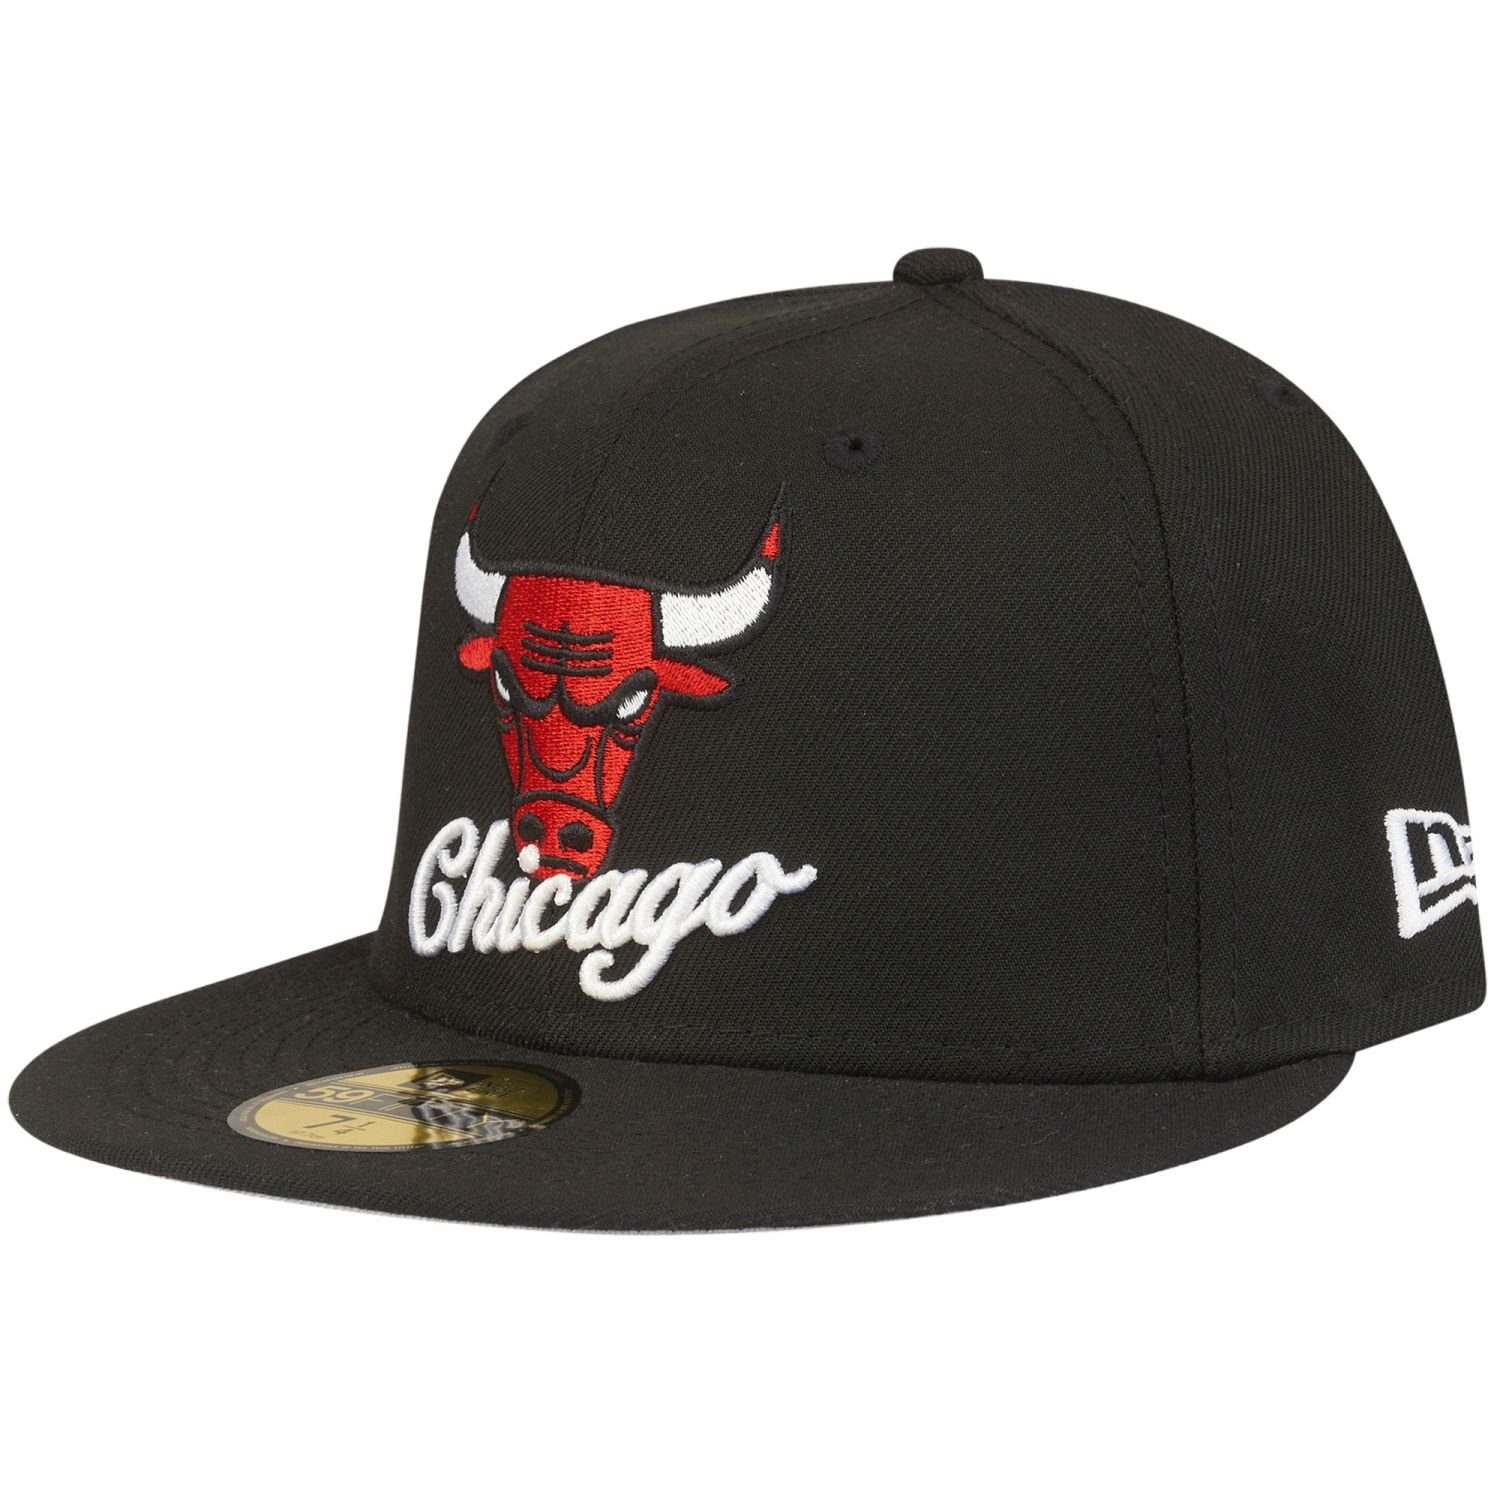 New Era Fitted Cap Chicago DUAL LOGO 59Fifty Bulls